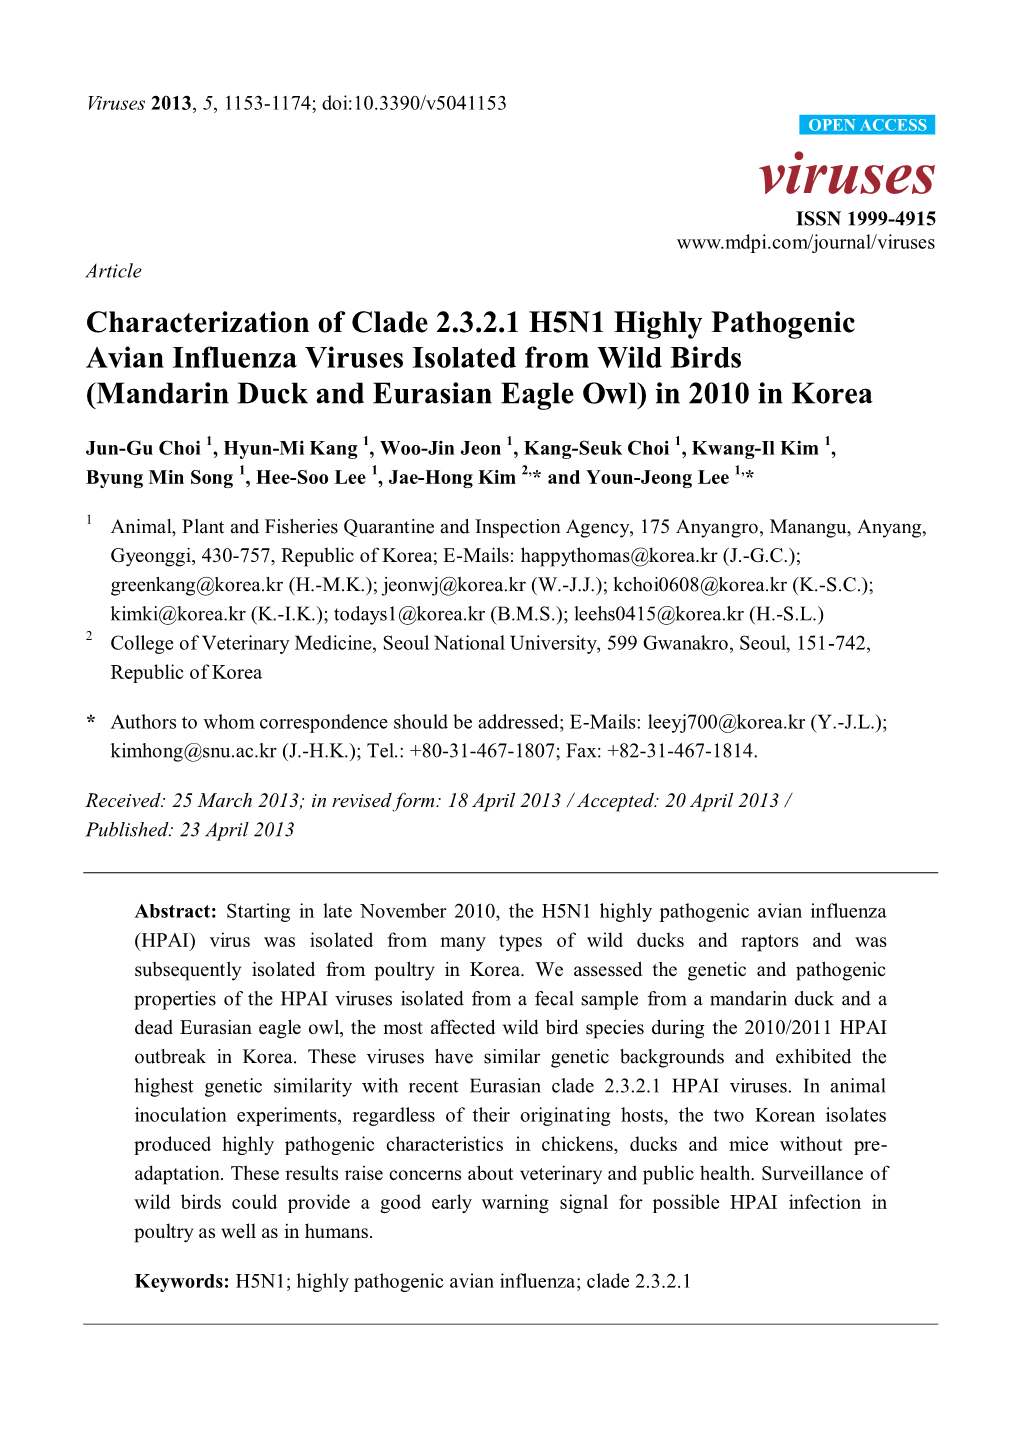 Characterization of Clade 2.3.2.1 H5N1 Highly Pathogenic Avian Influenza Viruses Isolated from Wild Birds (Mandarin Duck and Eurasian Eagle Owl) in 2010 in Korea